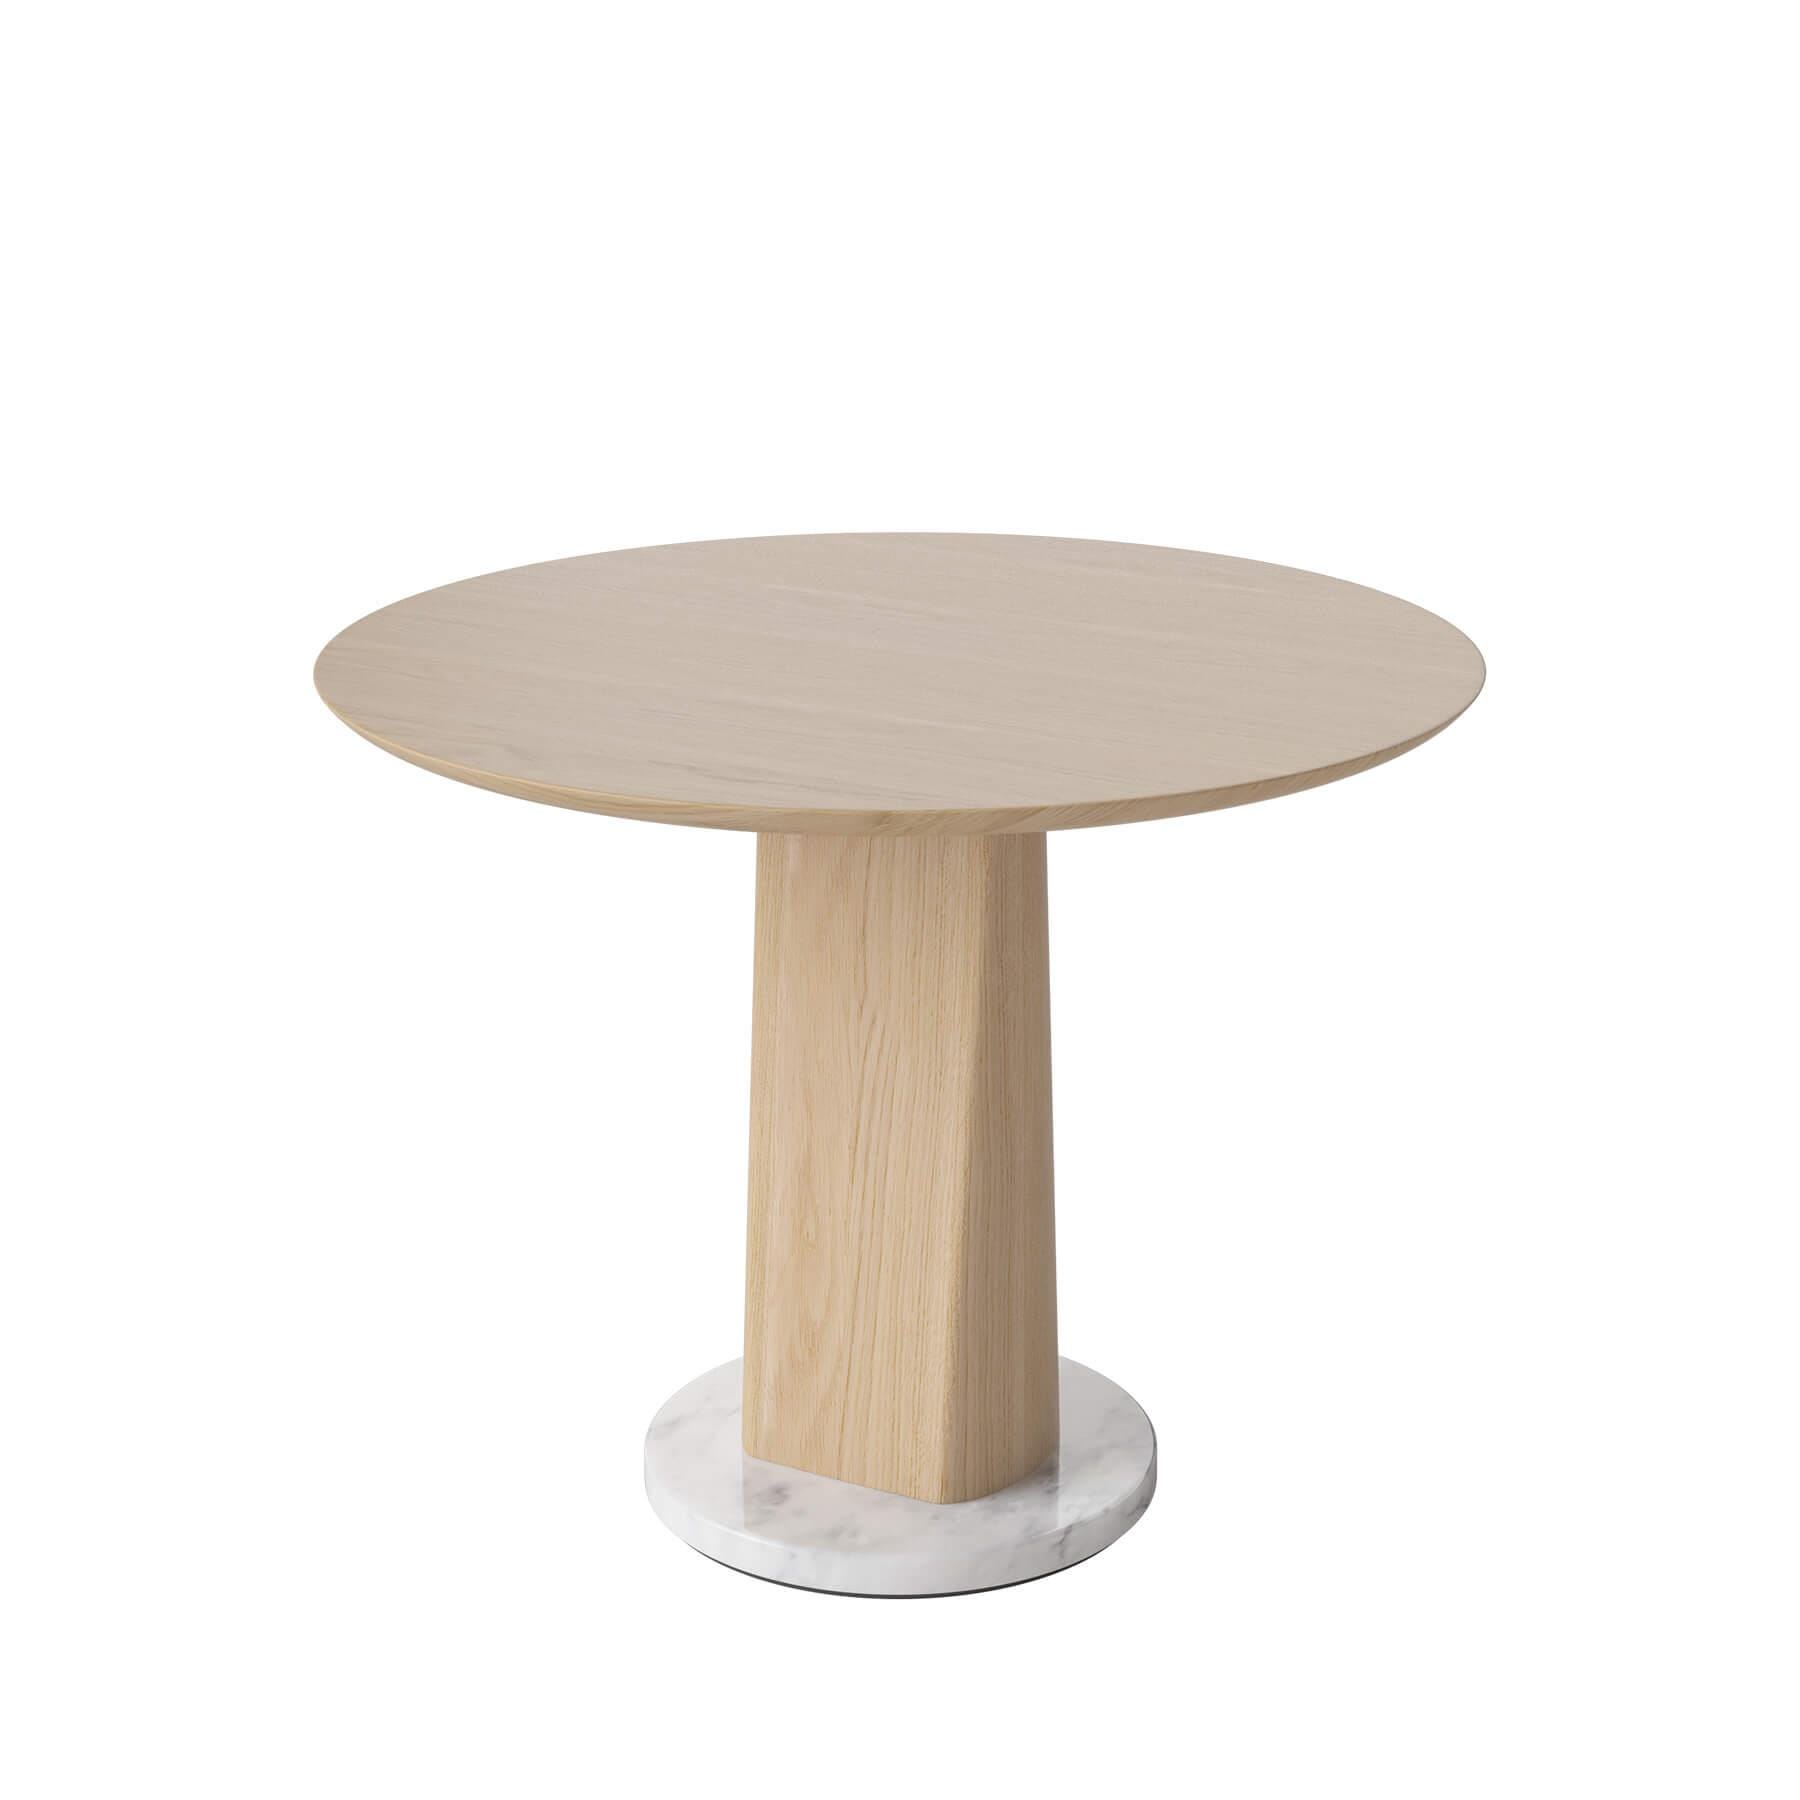 Bolia Root Side Table Large Low White Oiled Oak Light Wood Designer Furniture From Holloways Of Ludlow